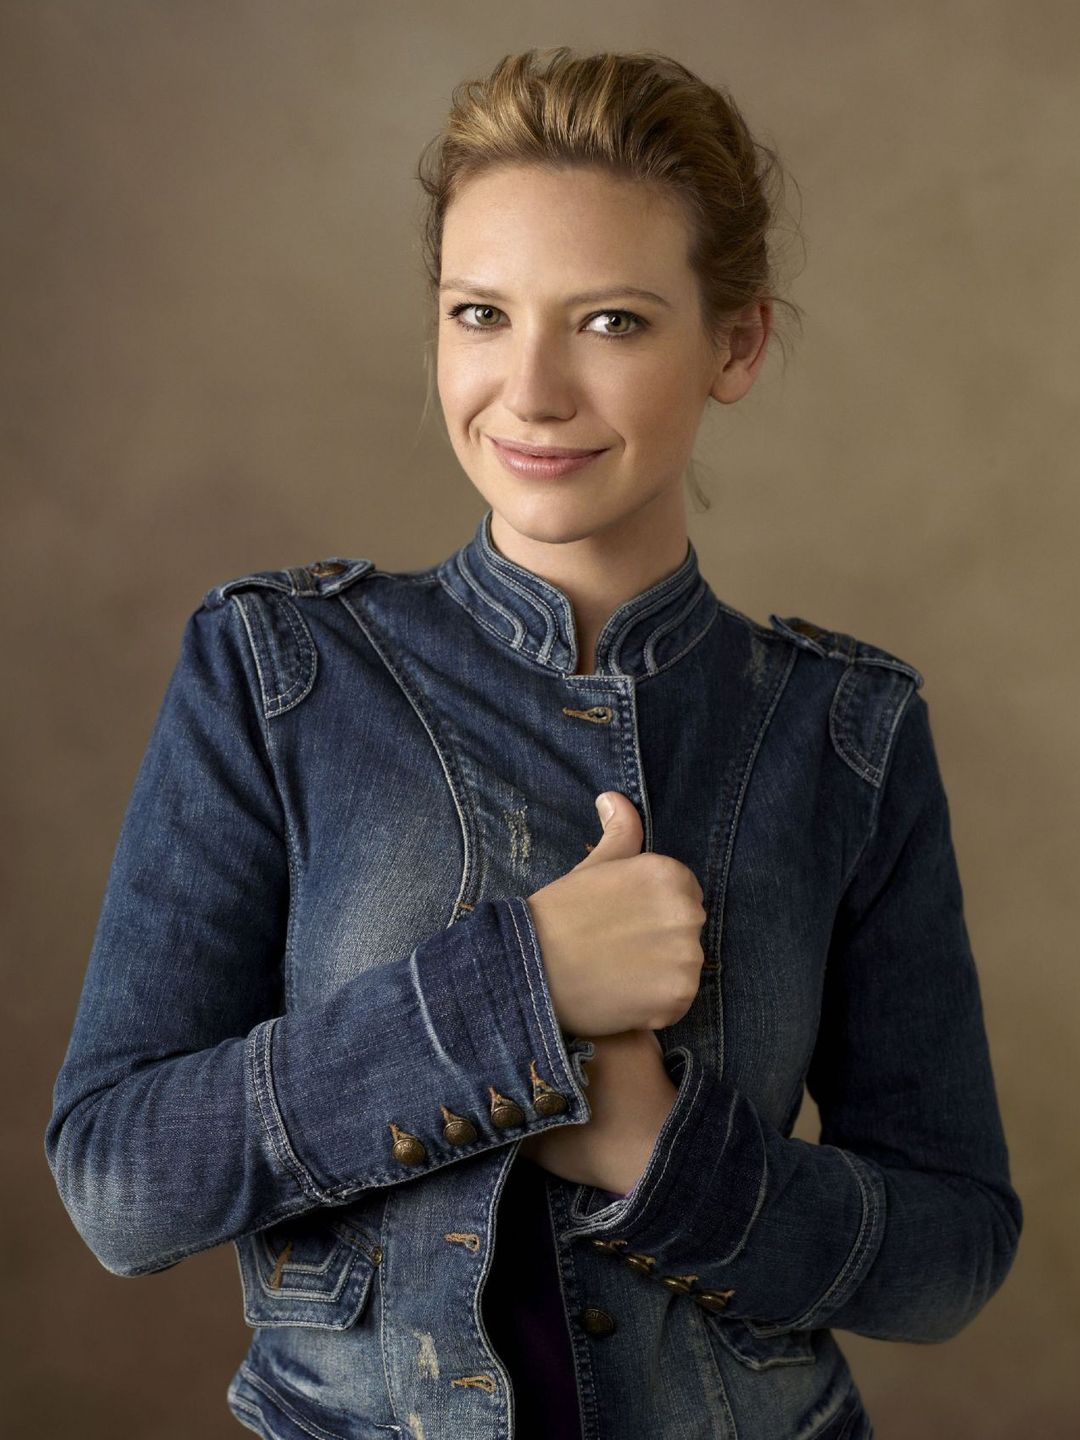 Anna Torv who are her parents